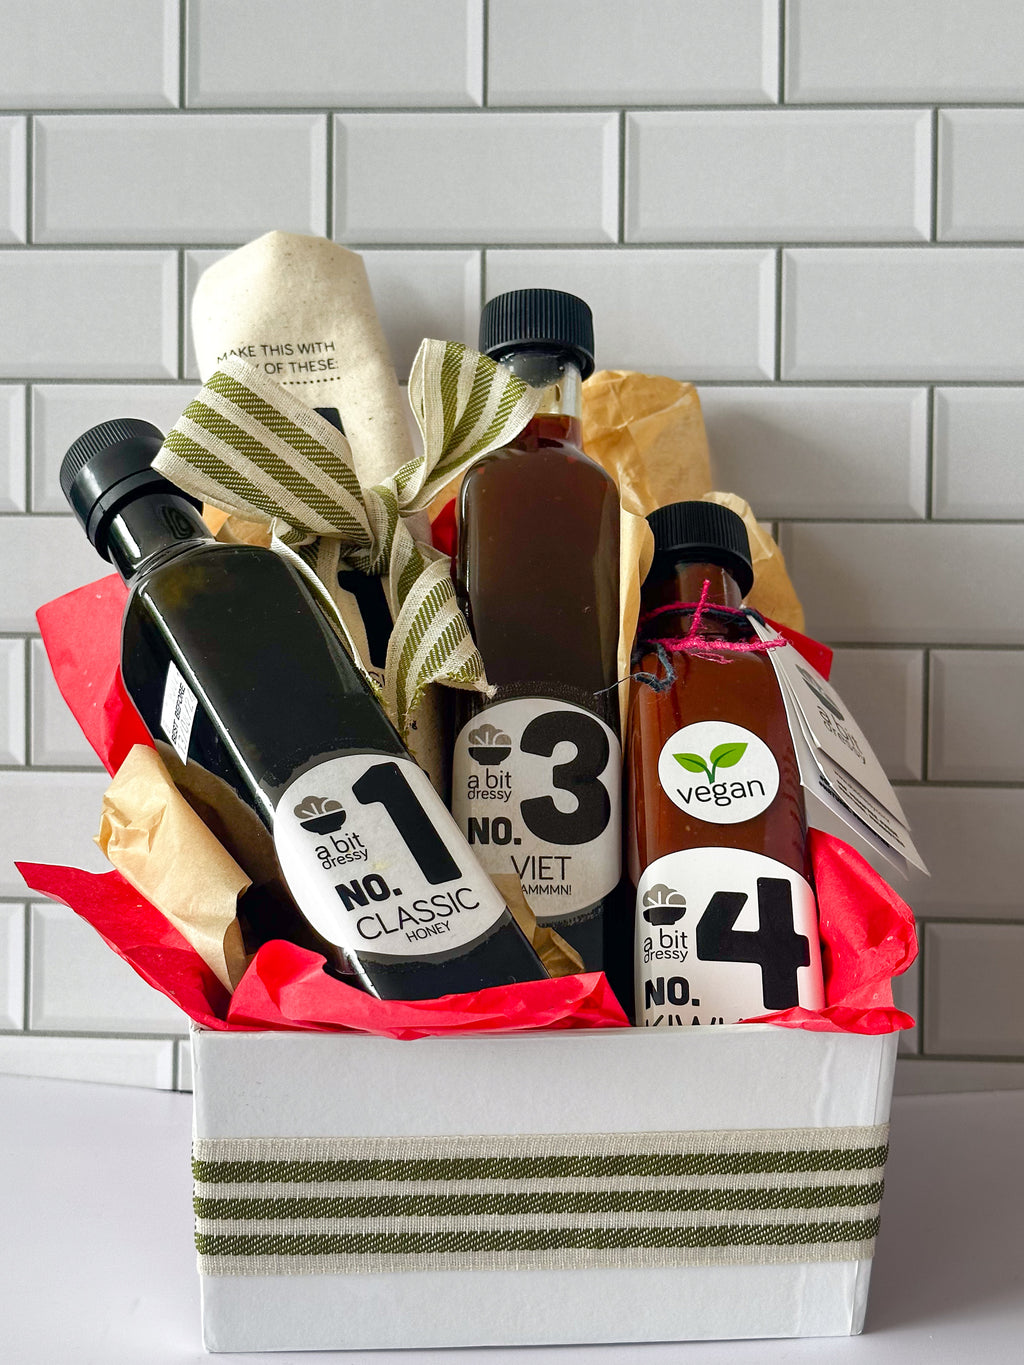 The Summer Sauces & Salads Sorted Bundle, featuring No.1 Classic Tart Dressing, No.3 Viet Dammmn! Dressing/Marinade, No.4 Smoky BBQ Sauce, and a large cotton tea towel, offering a combination of savory condiments and a practical kitchen accessory.